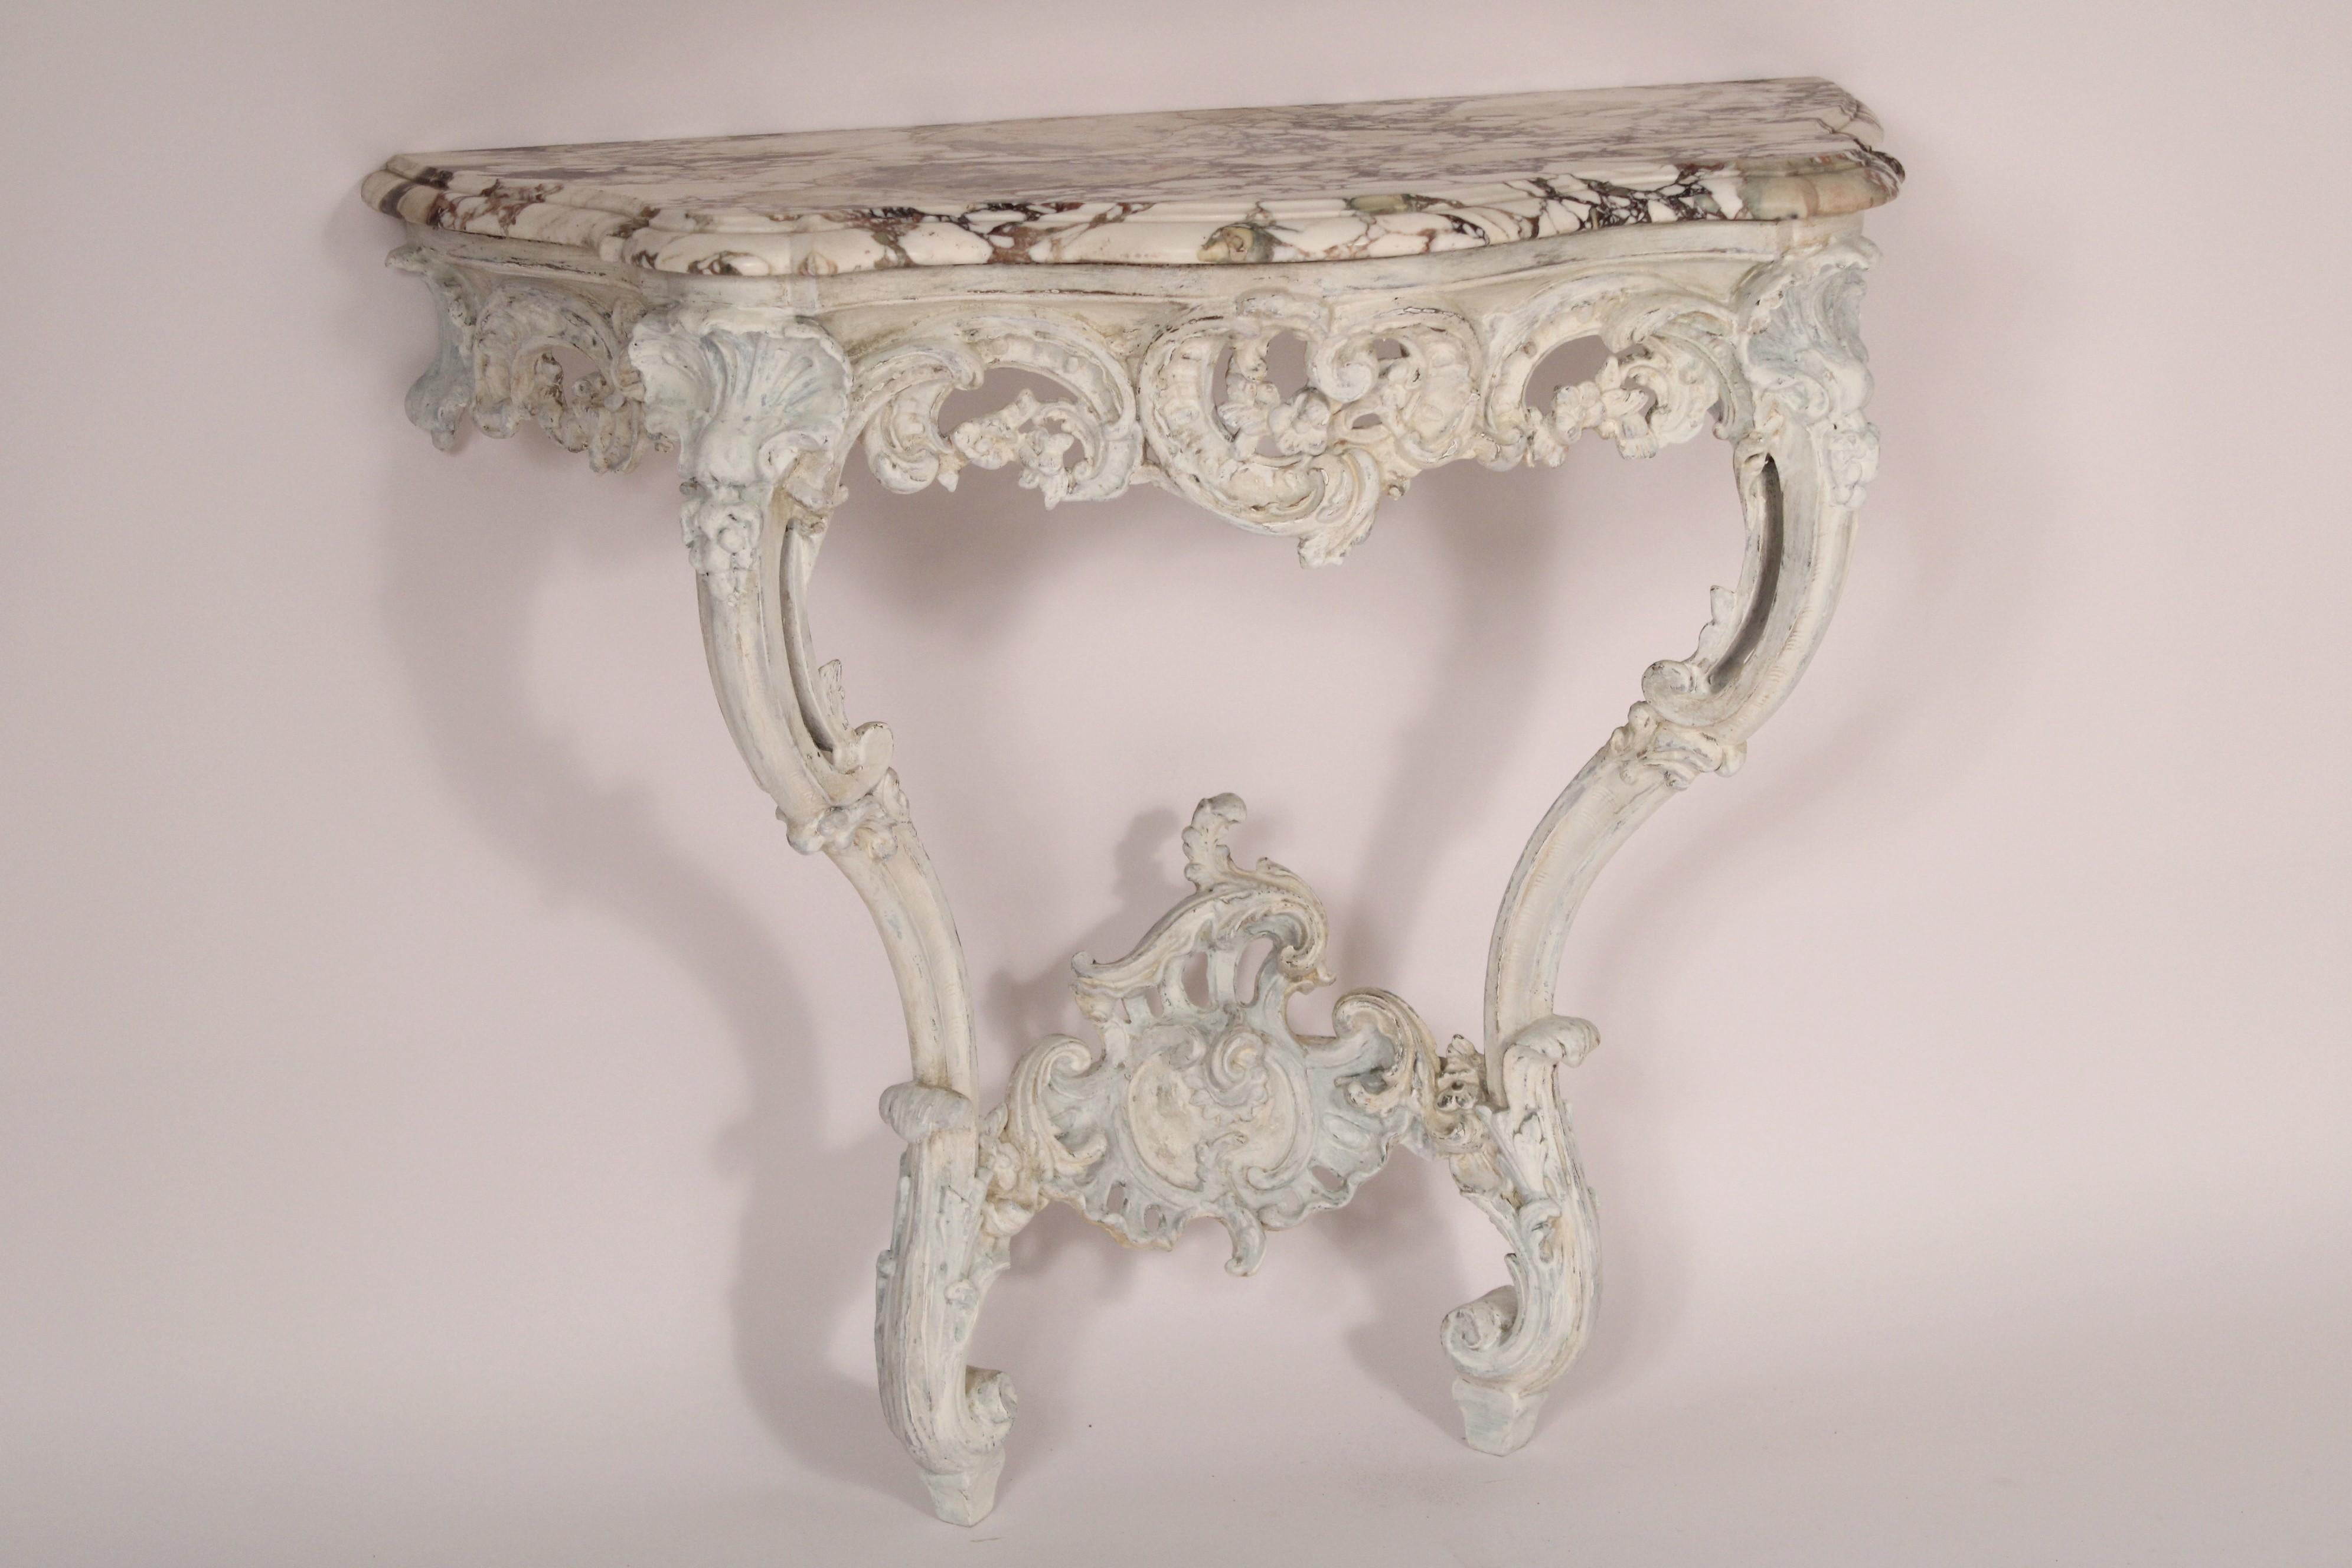 Louis XV style painted console table with marble top, circa 1930's. With an excellent quality marble top,  the frieze with floral, c scroll, and shell carvings, supported on cabriole legs. The frieze and stretcher bar is carved composition. 